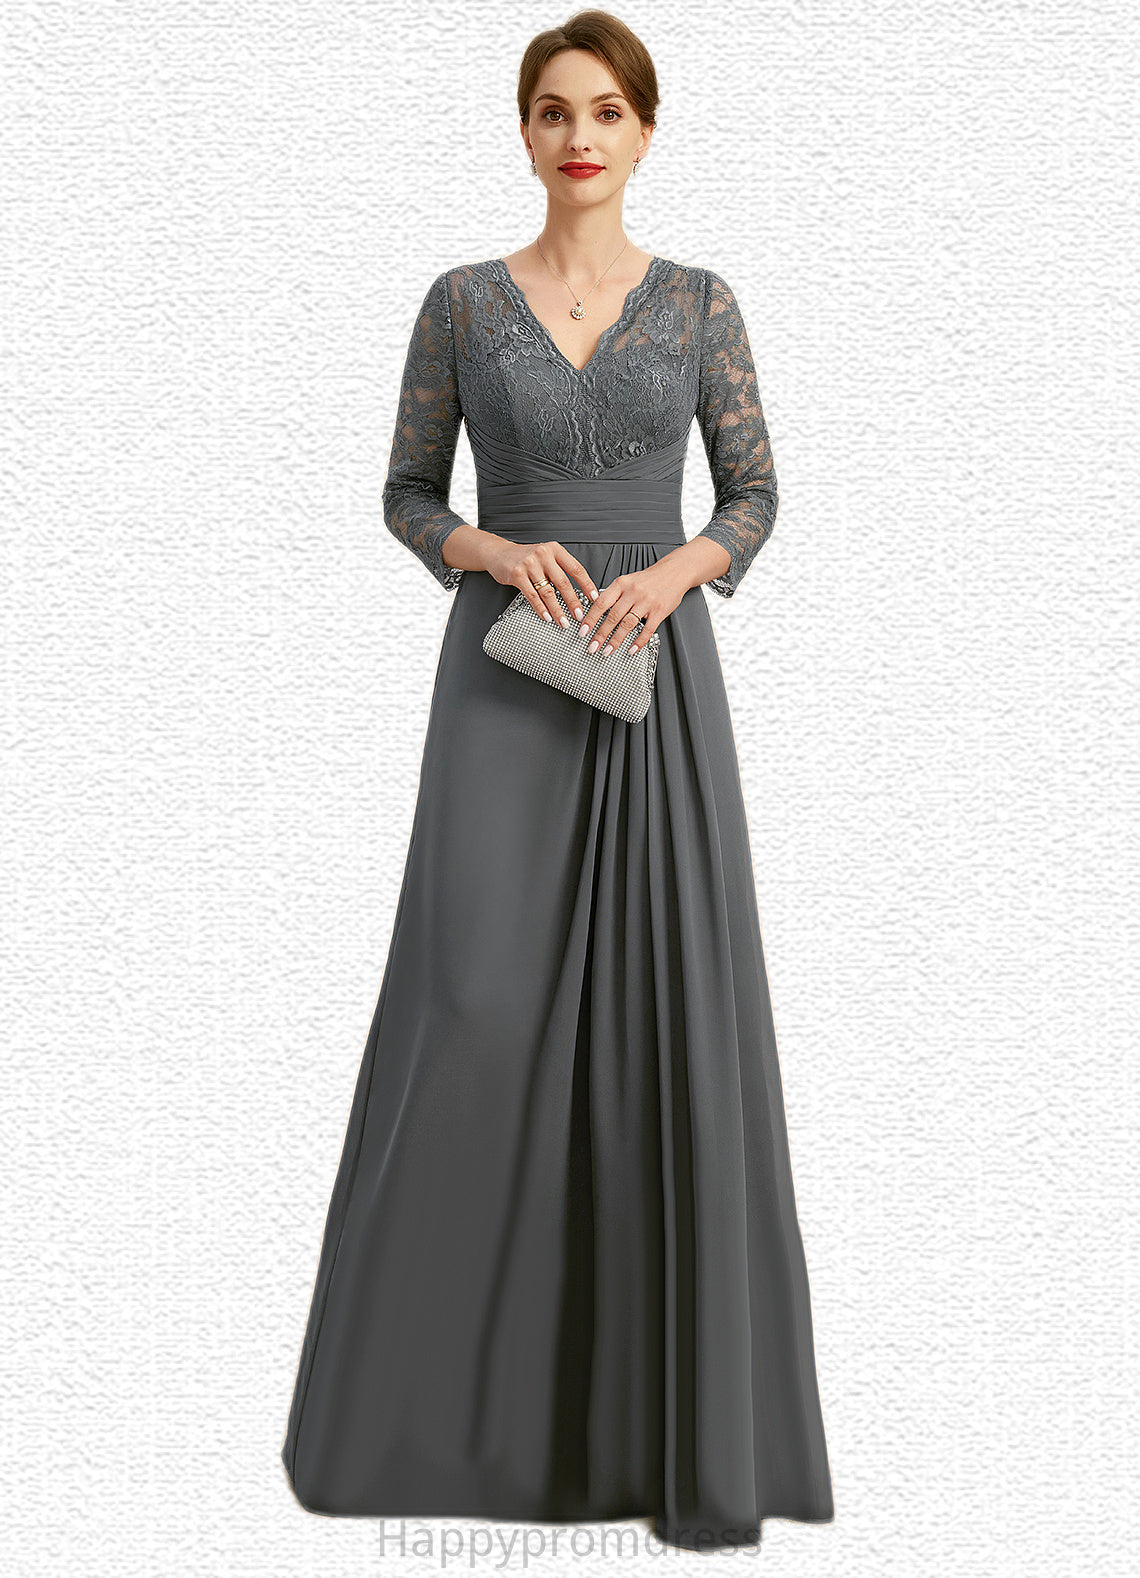 Sam A-line V-Neck Floor-Length Chiffon Lace Mother of the Bride Dress With Pleated XXSP0021850